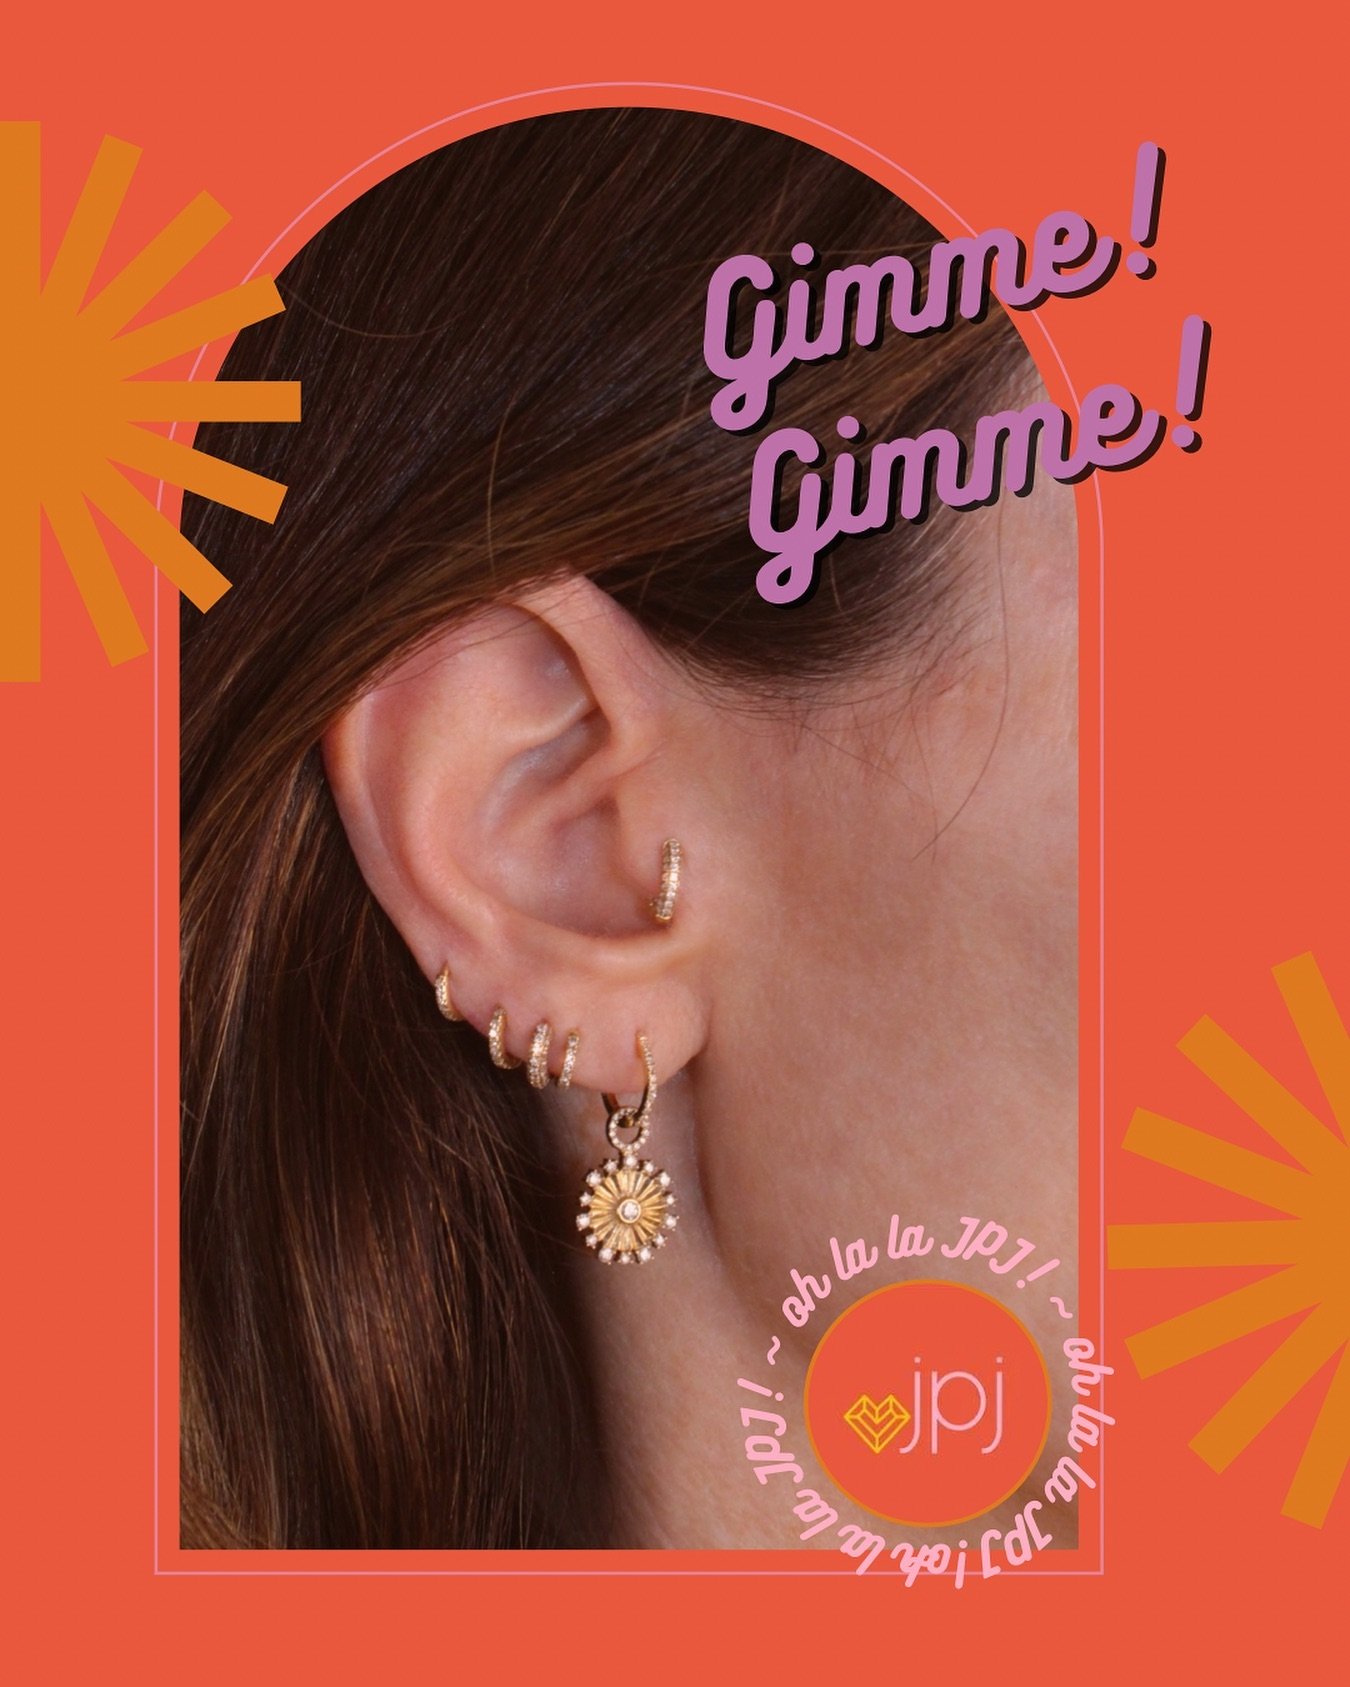 Add even more charm to your earrings&hellip;with earring charms!
💕
#charms #charming #earrings #finejewelry #jewelrydesigner #pretty #vogue #sun #spring